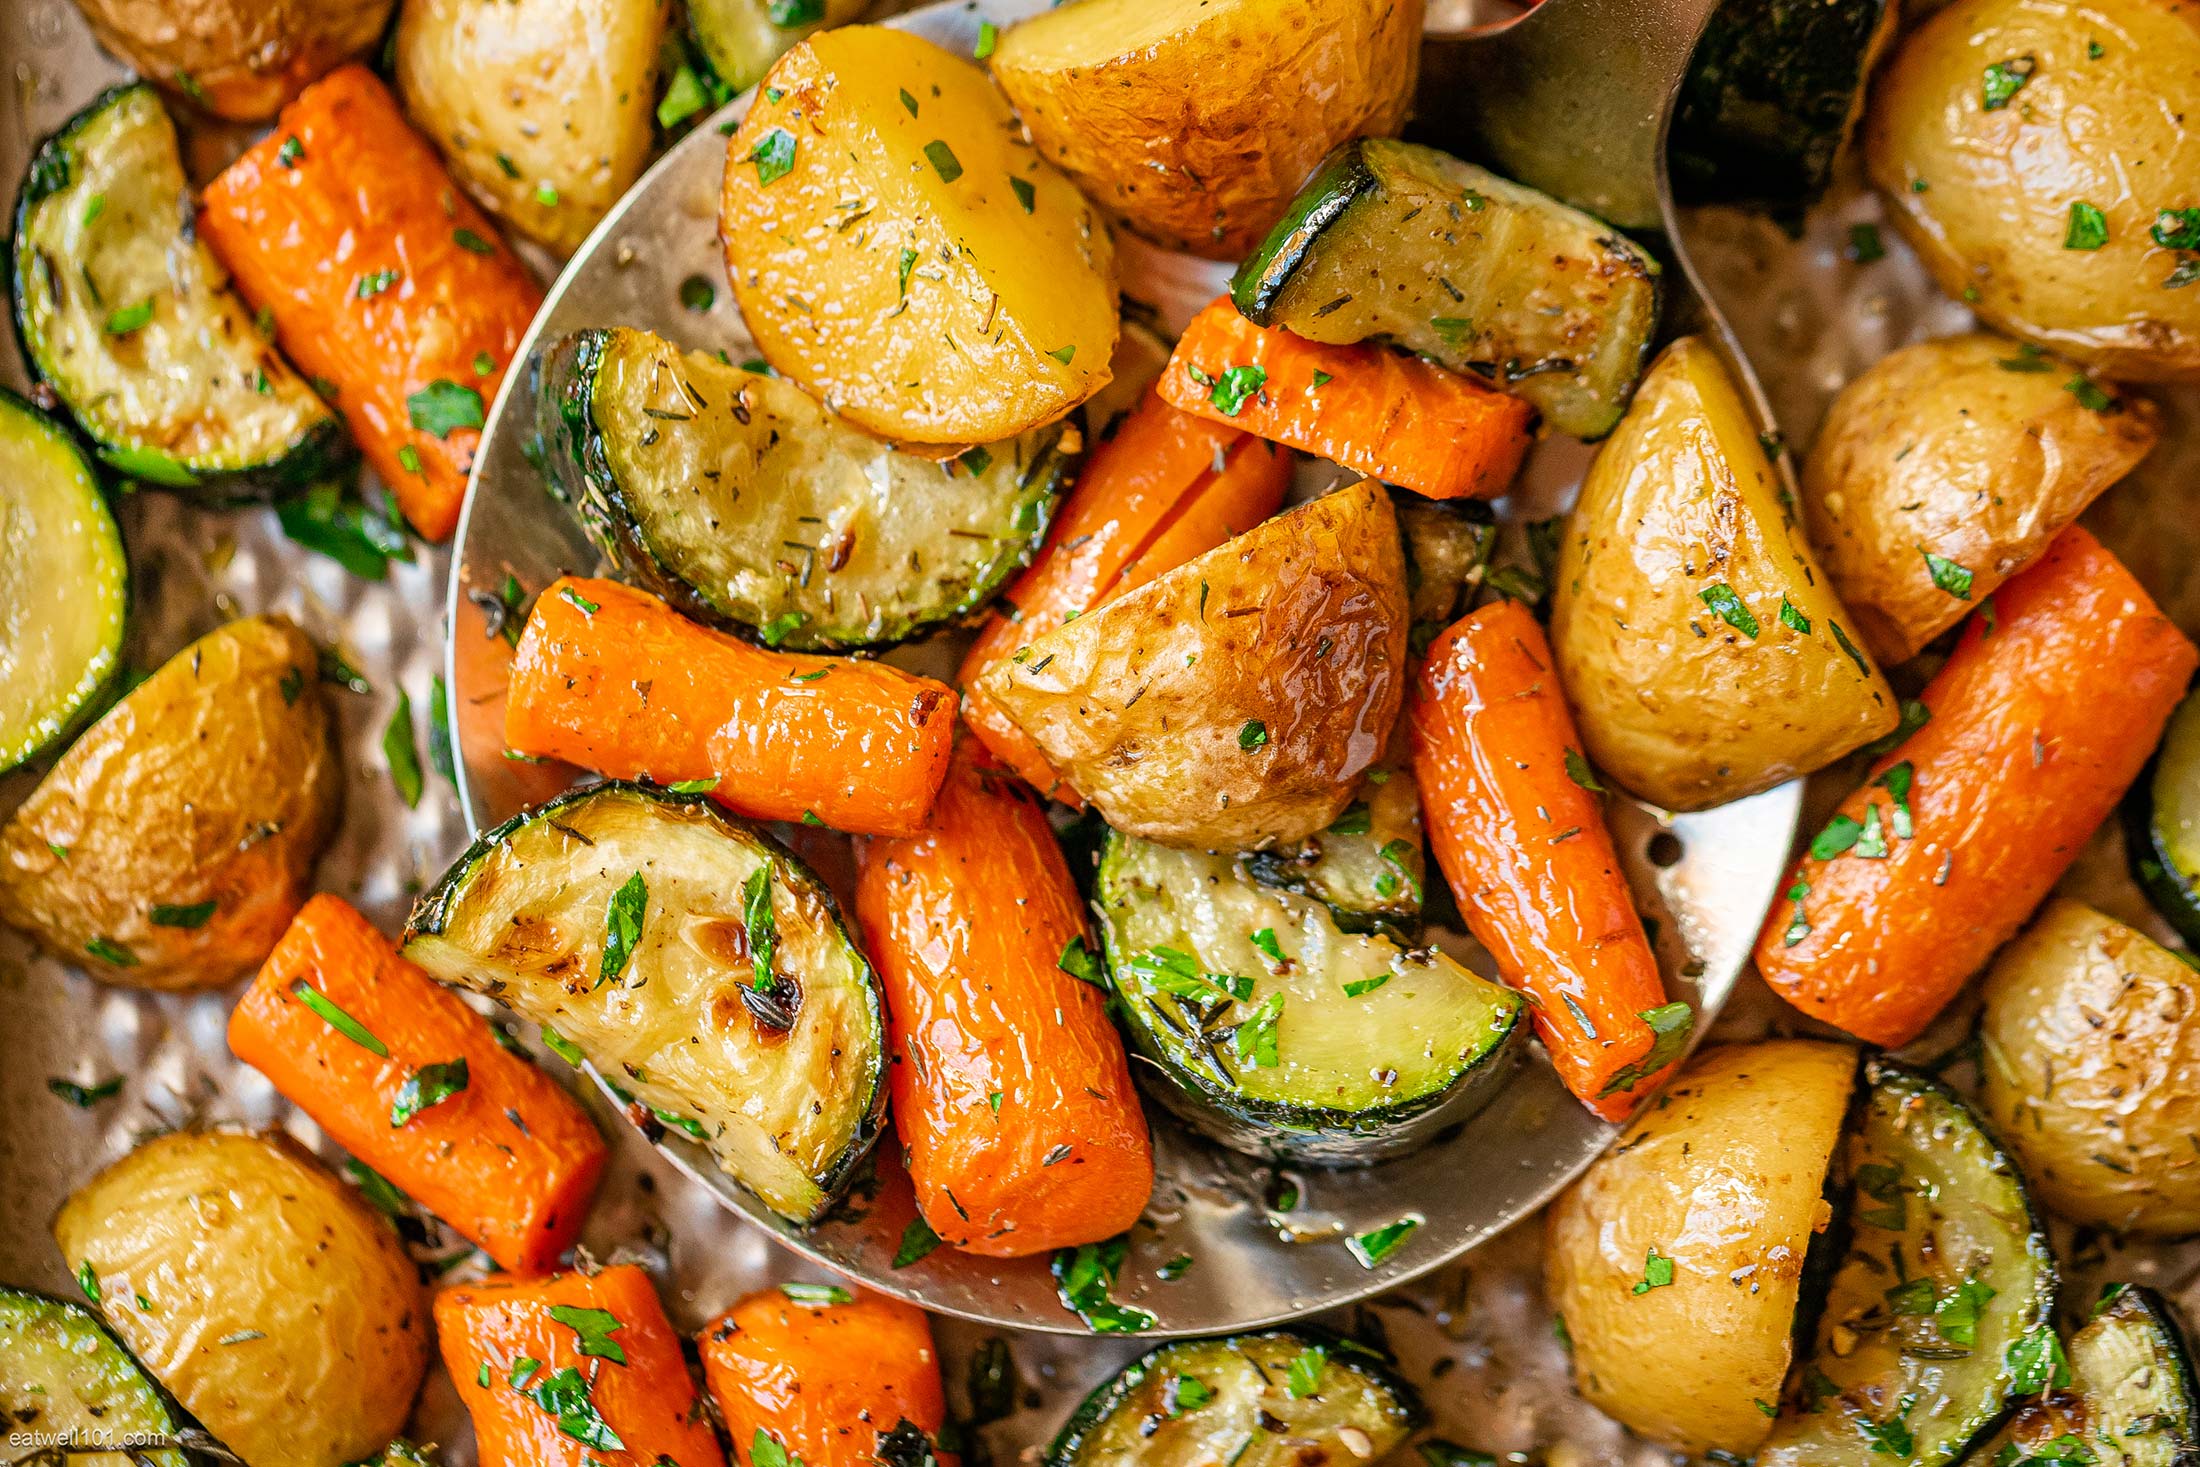 Garlic Herb Roasted Potatoes Carrots And Zucchini Roasted Vegetables Recipe Eatwell101